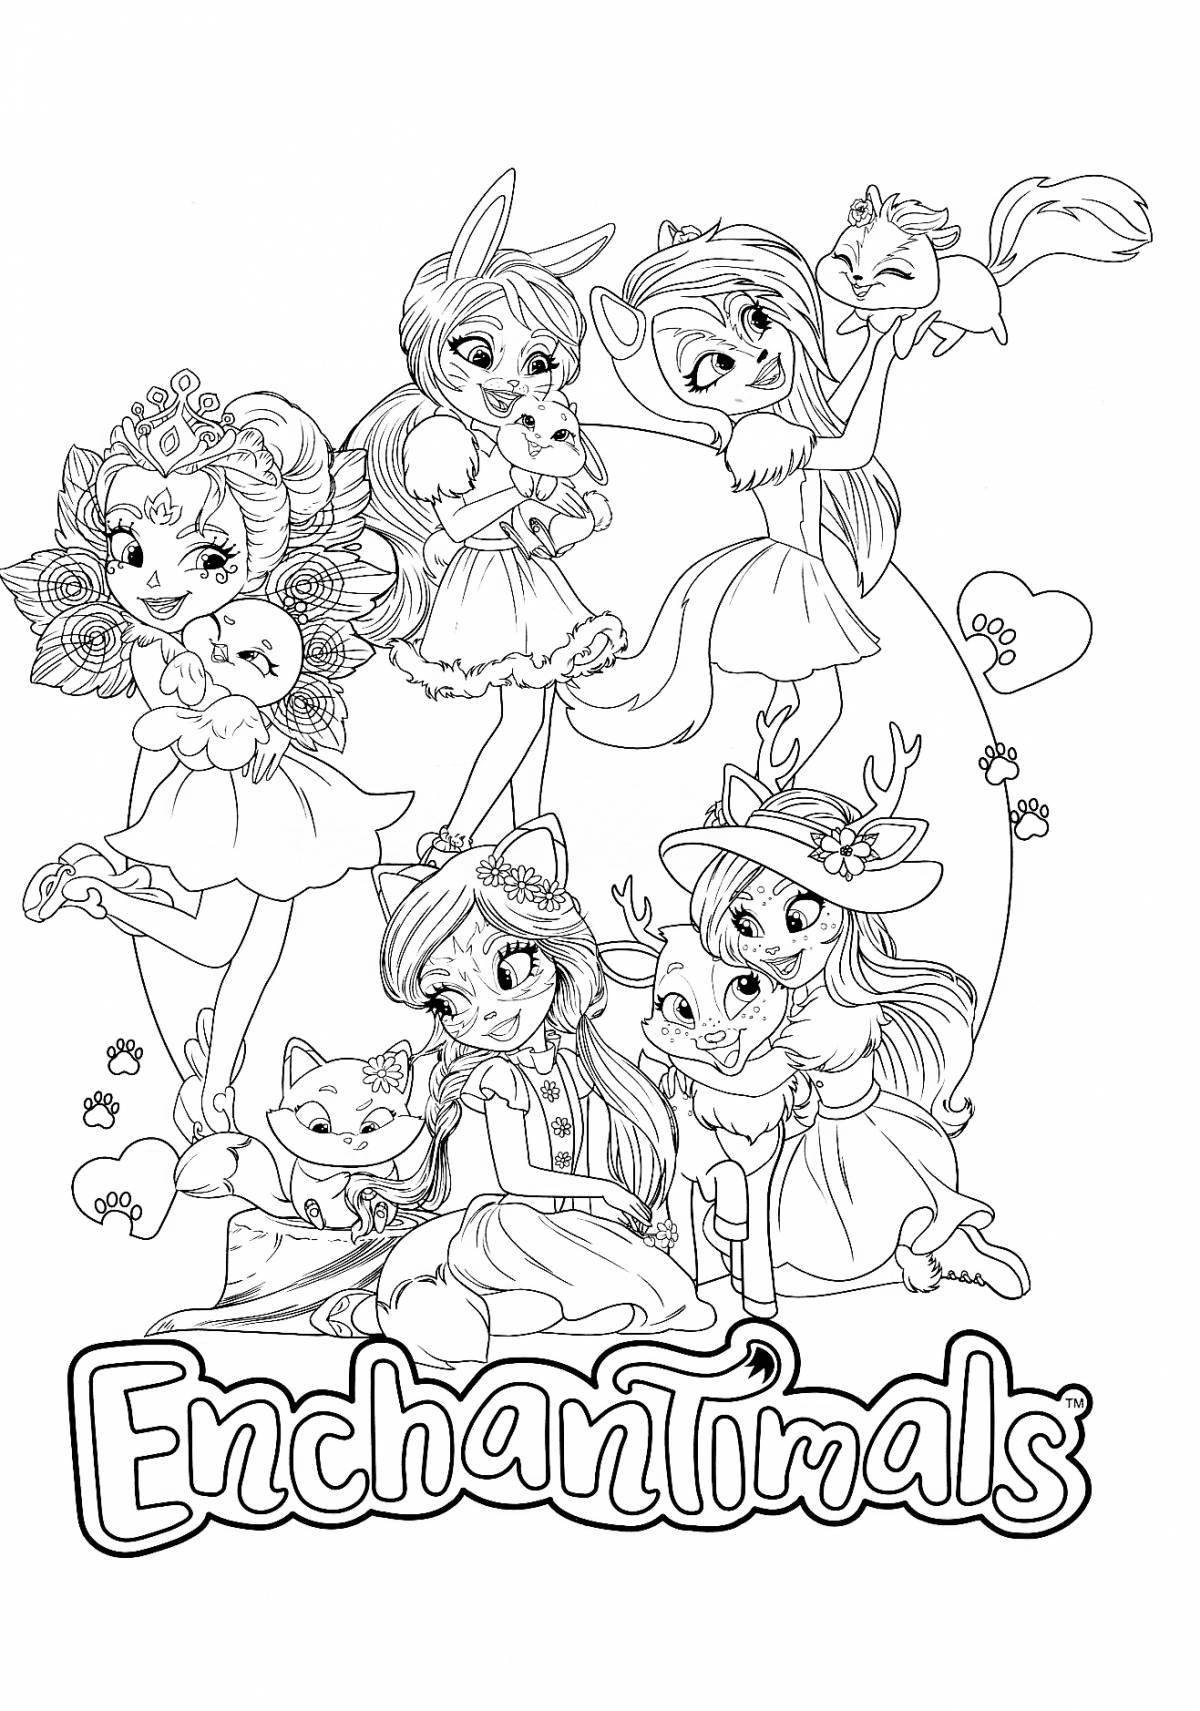 Enchantimals and pets playful coloring page